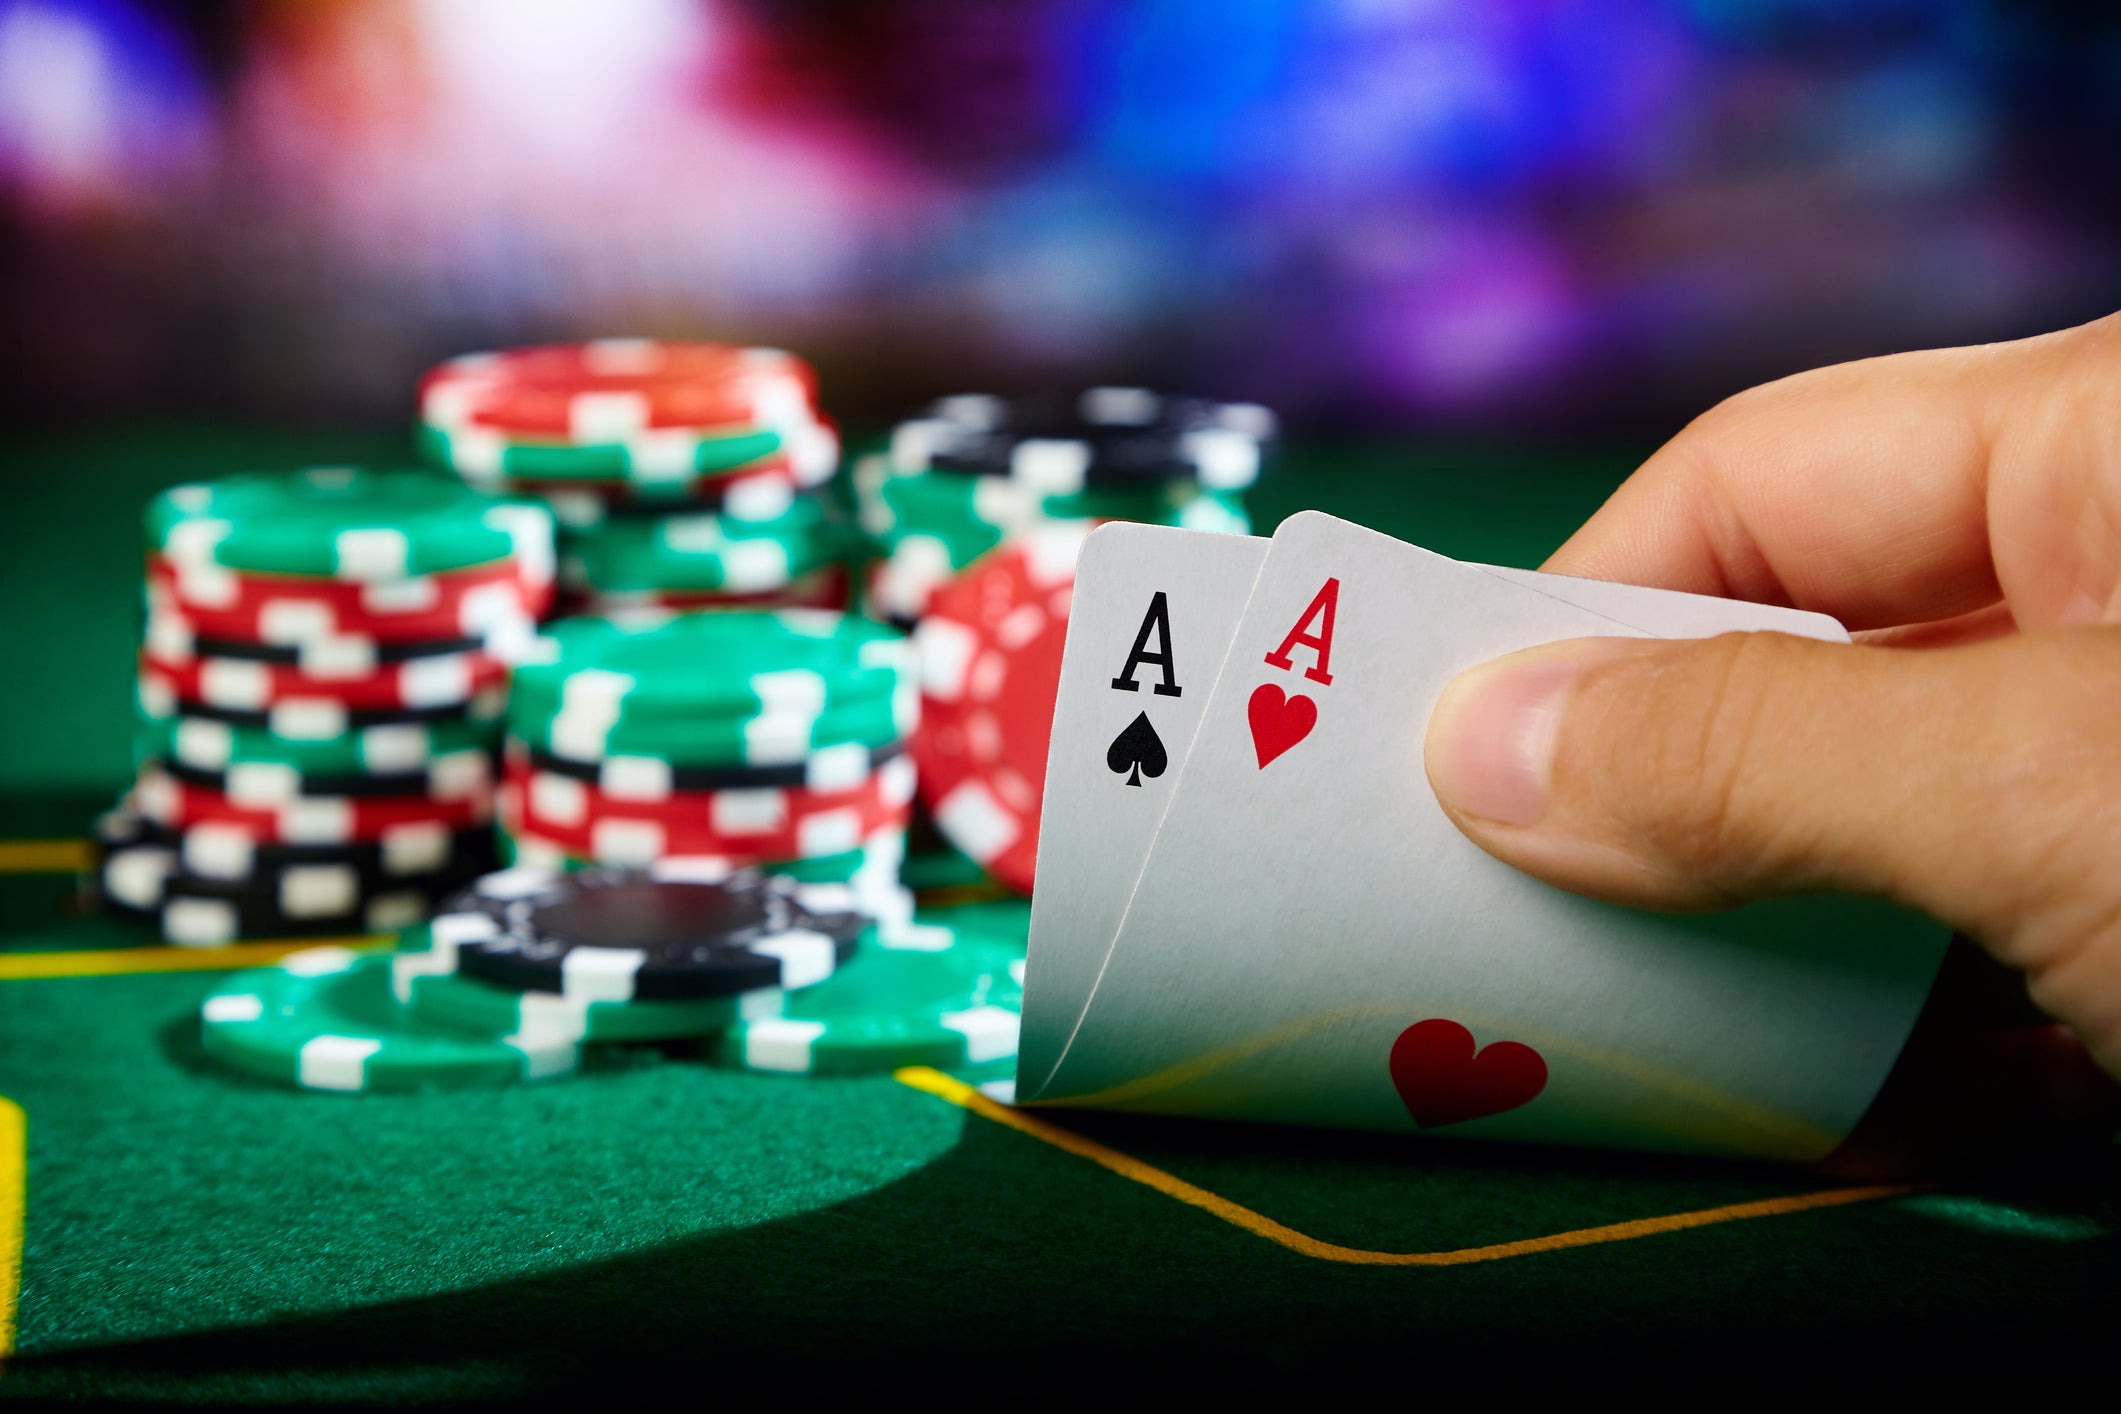 What Is The Hardest Hand To Win In Poker?